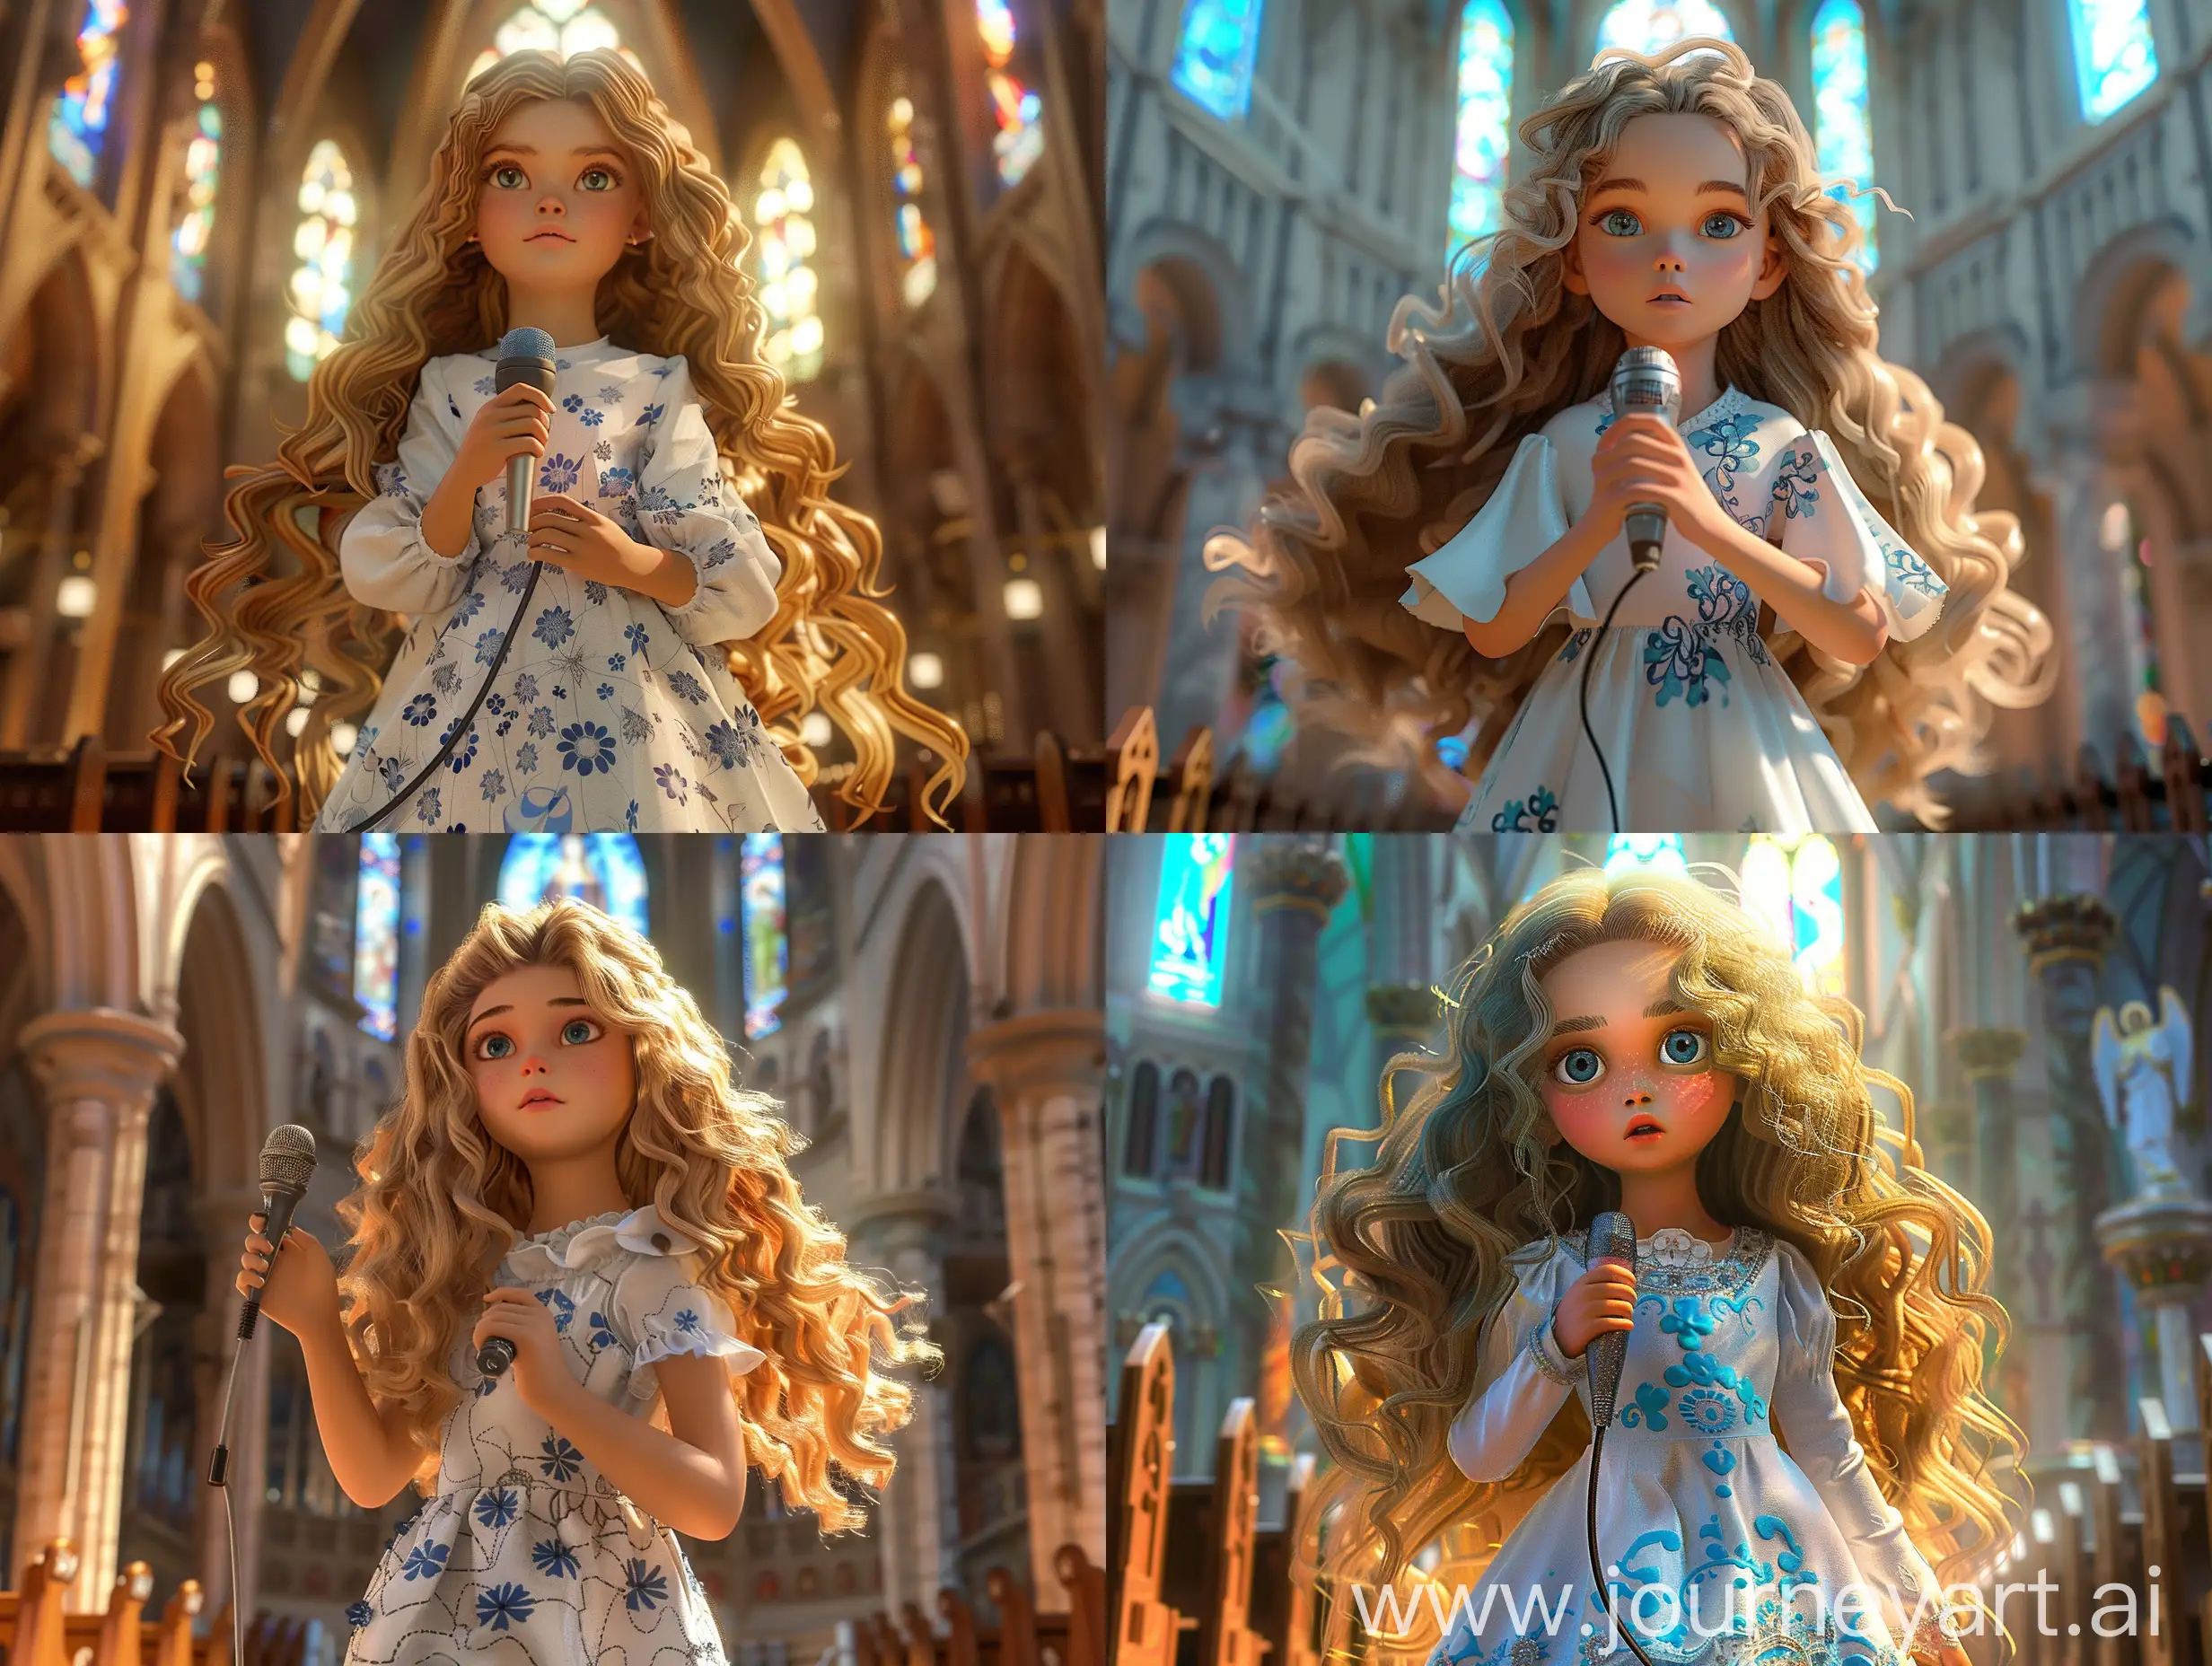 Captivating-3D-PixarStyle-Illustration-of-Determined-Girl-in-Majestic-Church